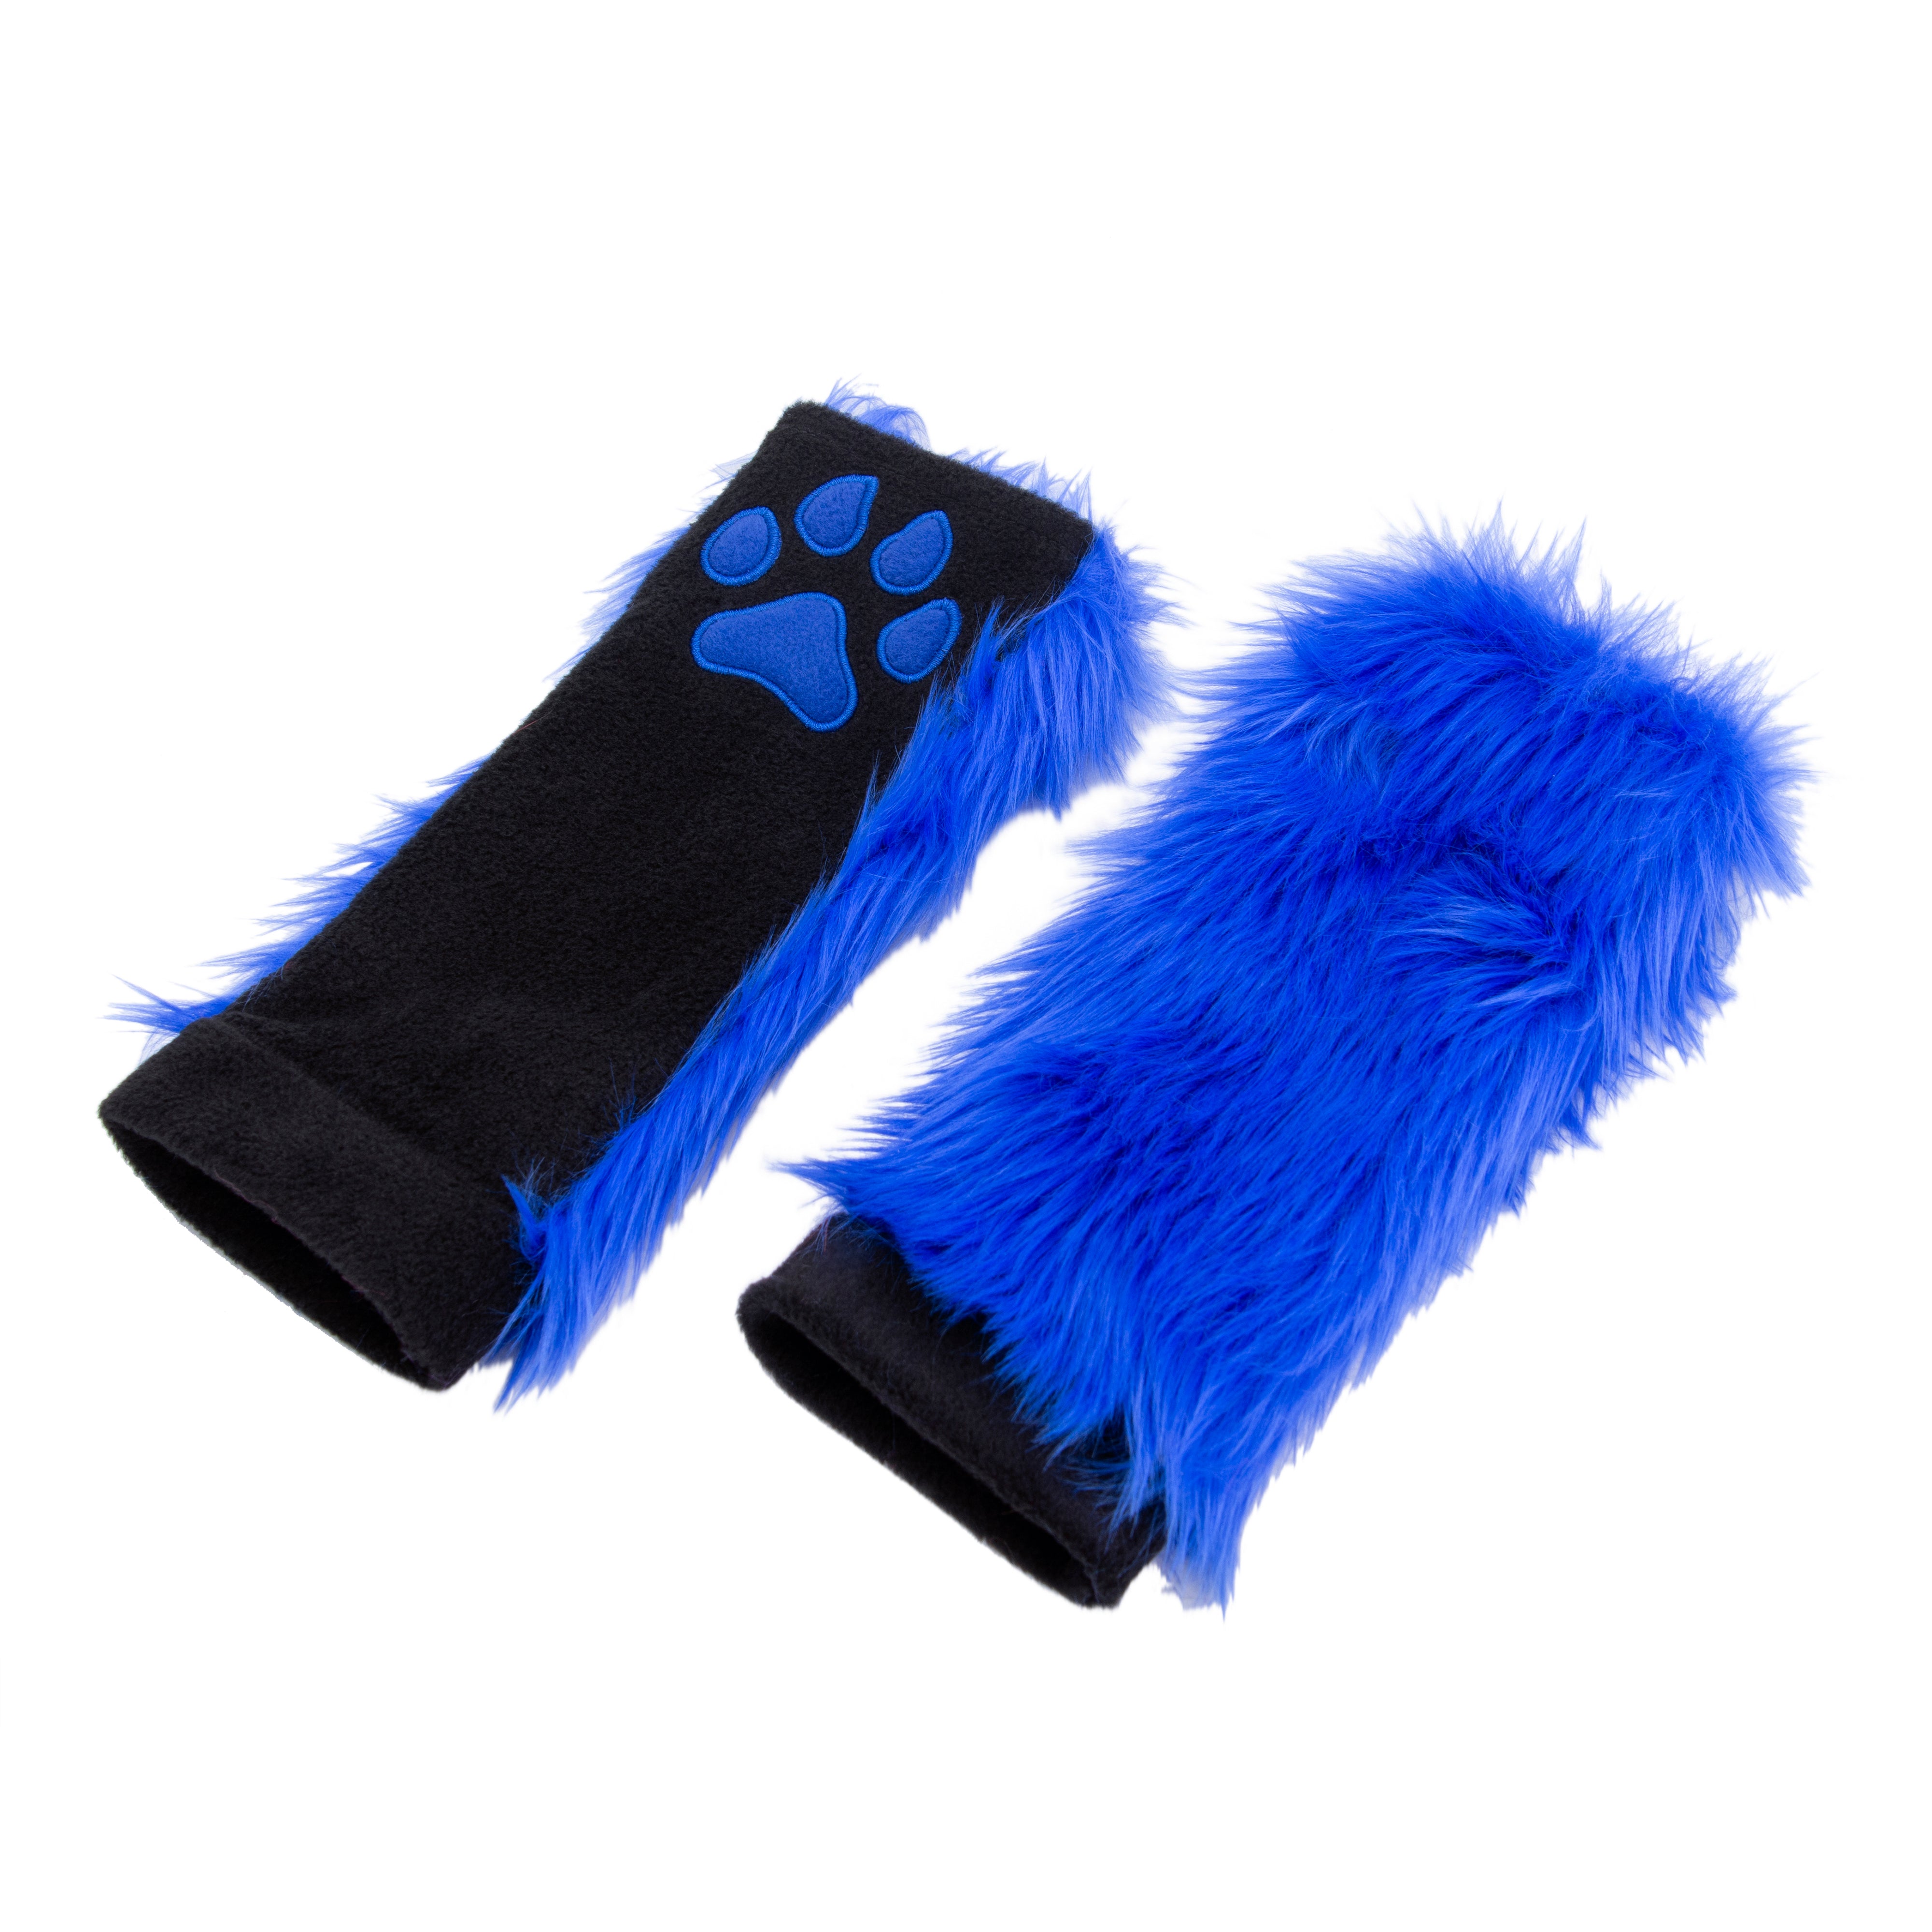 blue Pawstar PawWarmer furry faux fur paws. great for cosplay or partial fursuit.